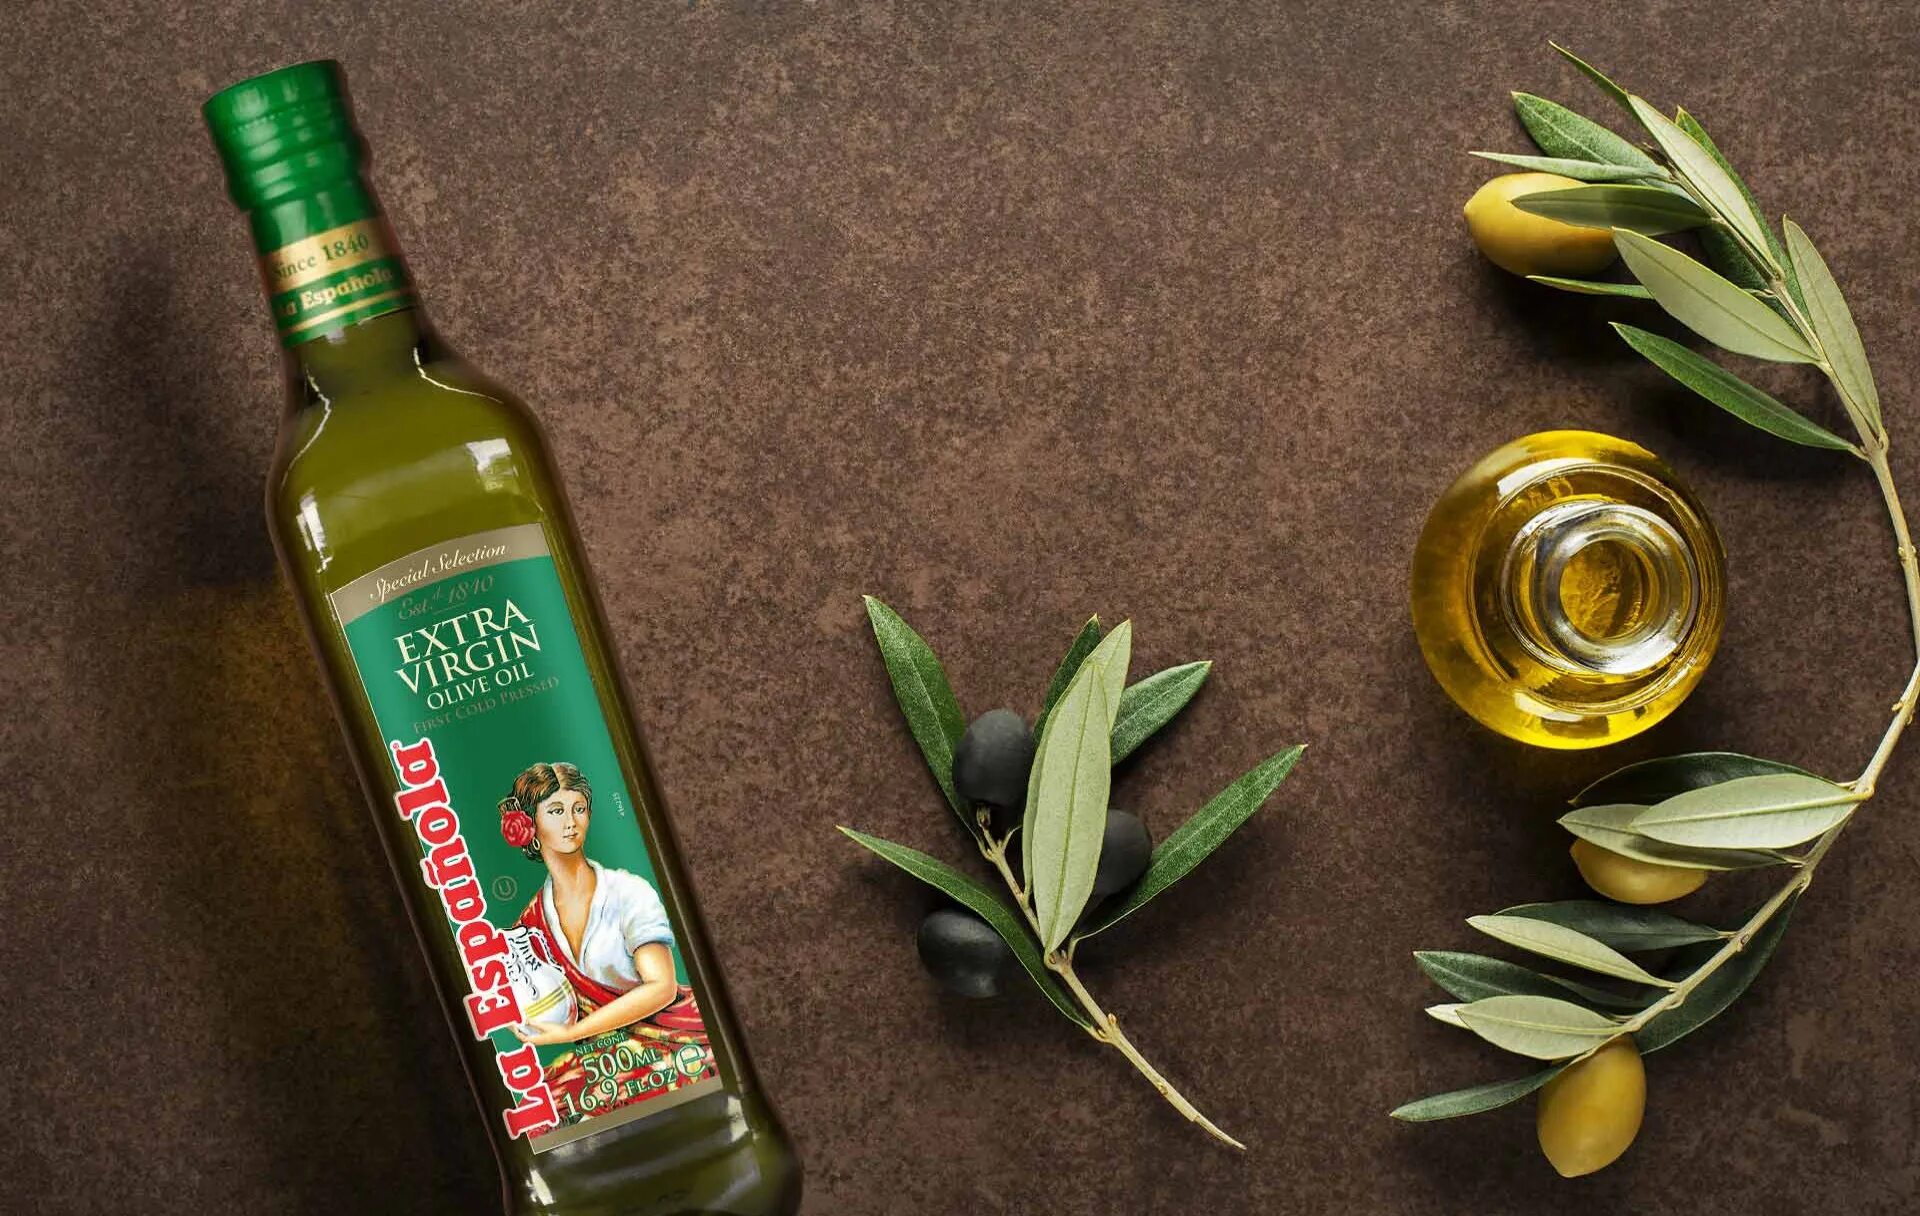 Olive Oil масло оливковое. San Michele Olive Oil. Олив Ойл масло оливковое. Оливки и оливковое масло. Оливковое масло внутрь